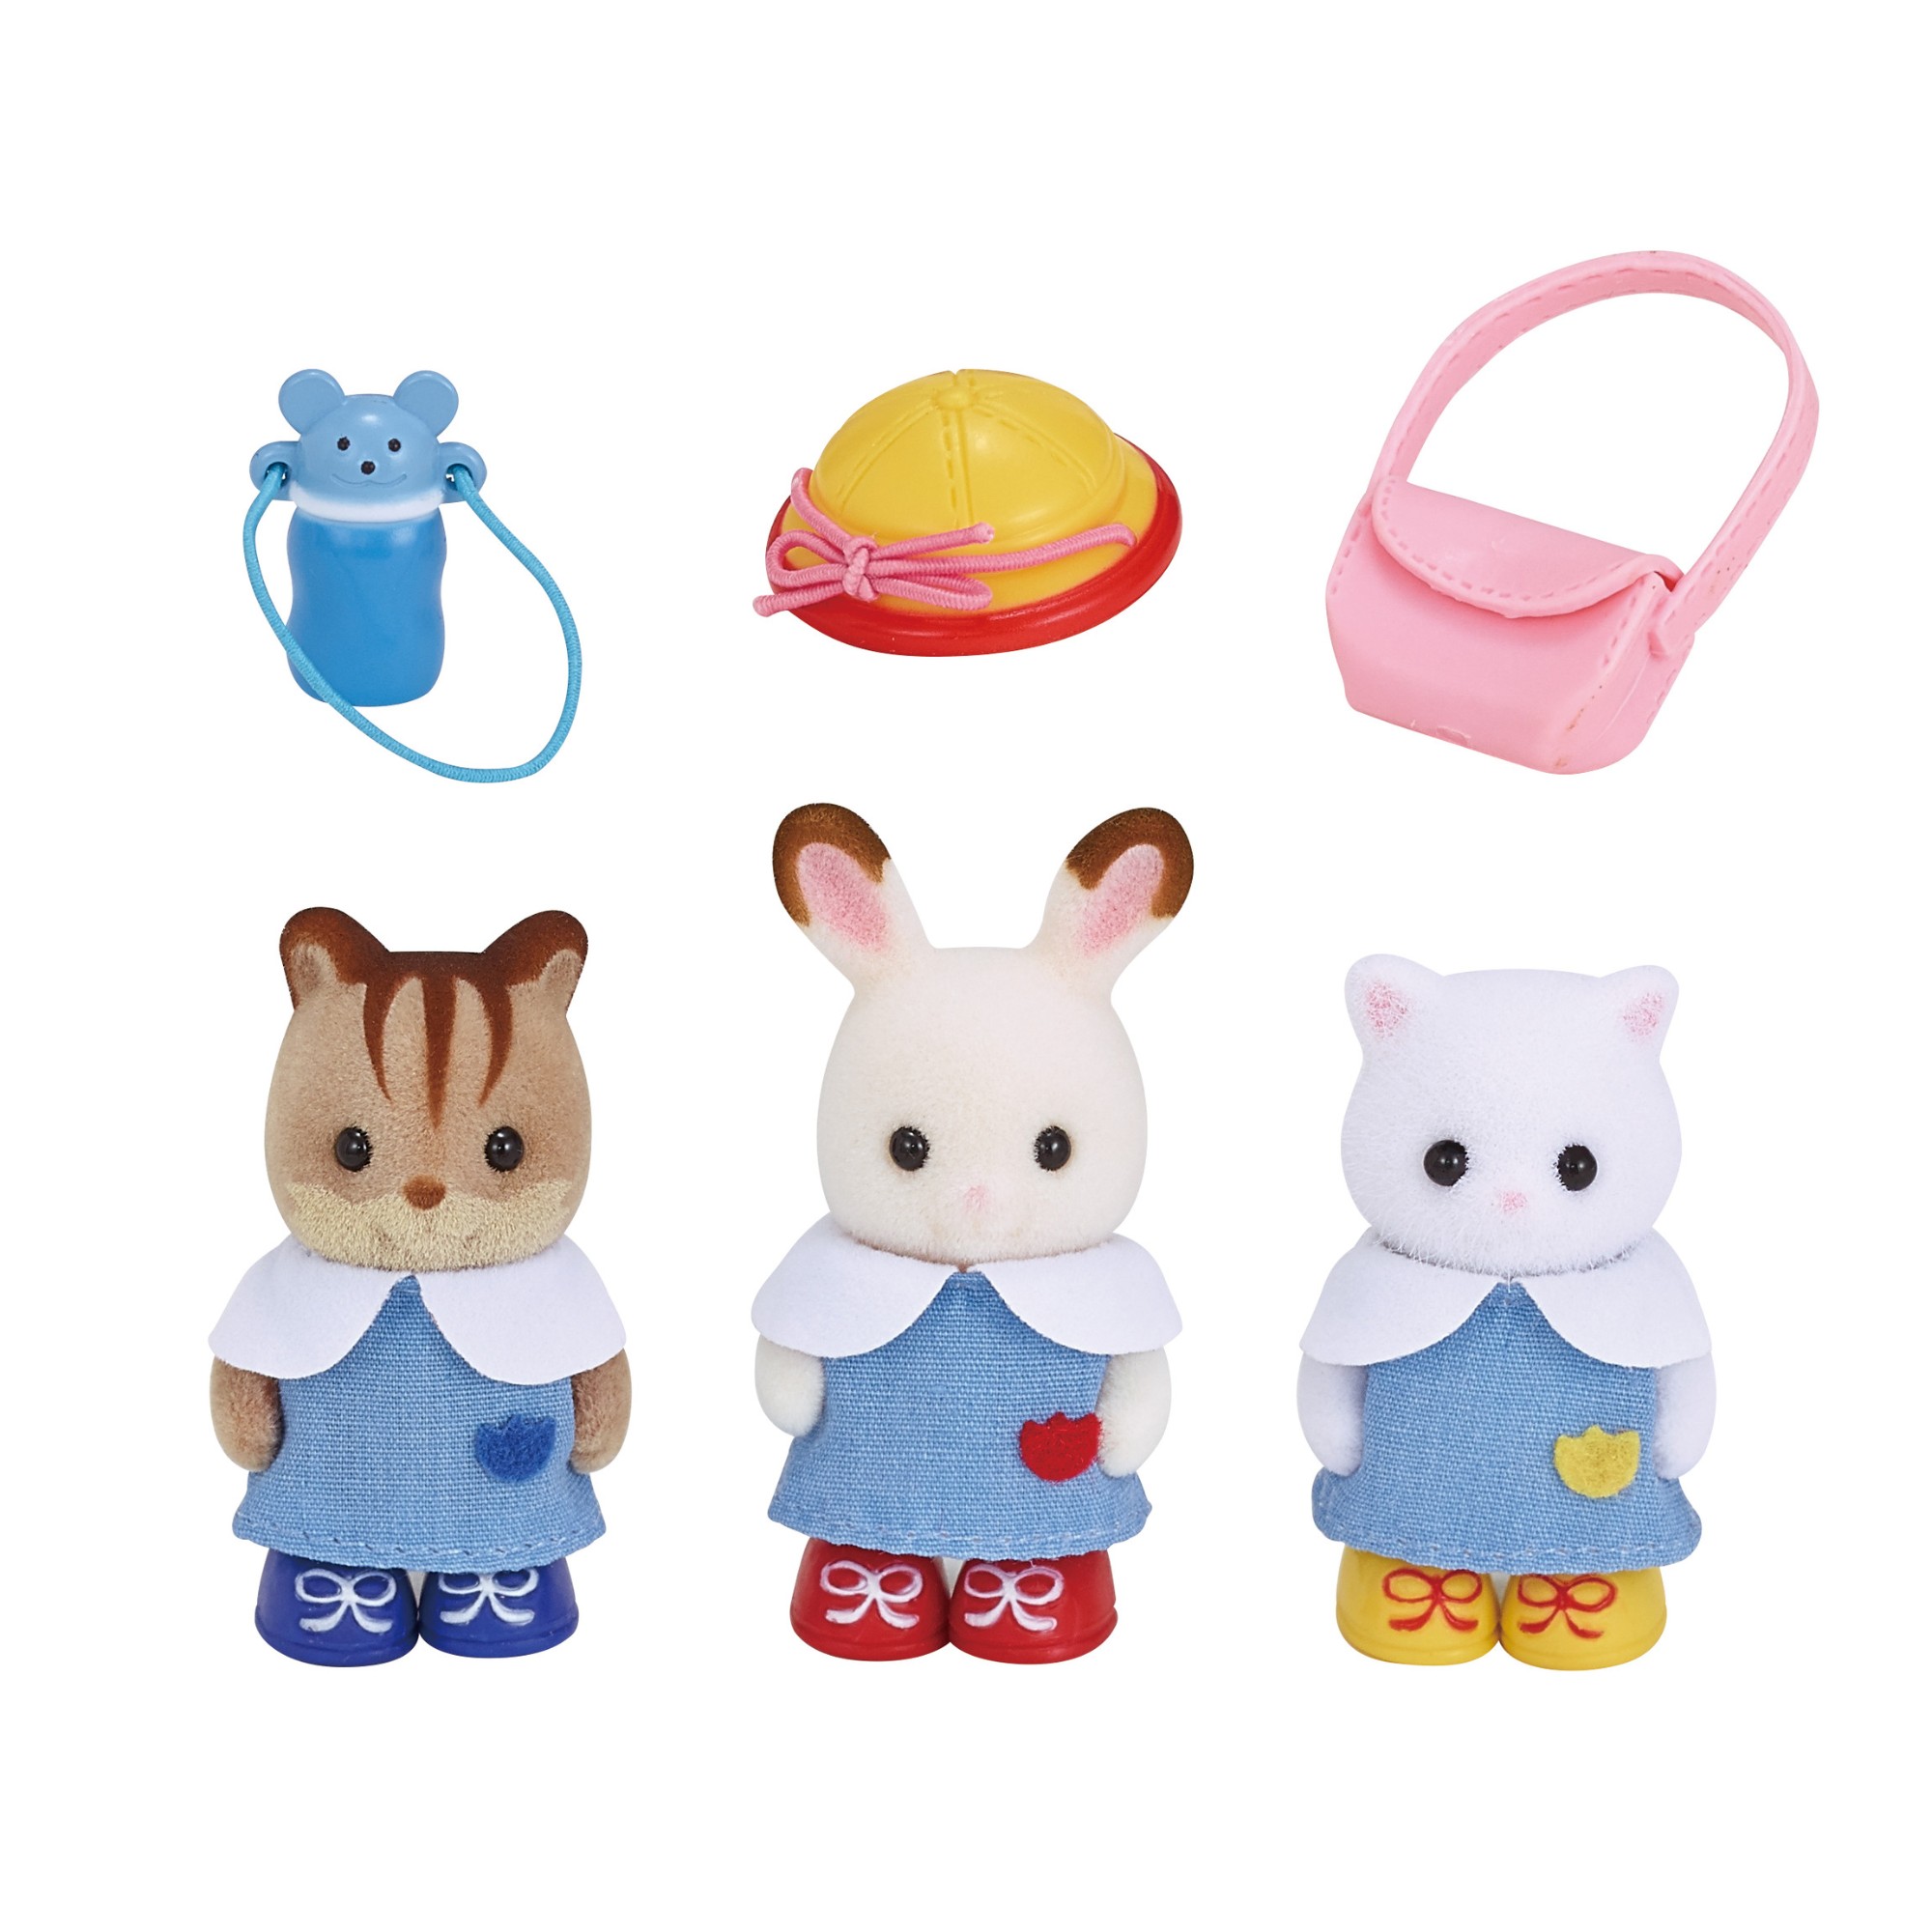 Calico Critters Nursery Friends, Set of 3 Collectible Doll Figures in Nursery School Outfits - image 3 of 4